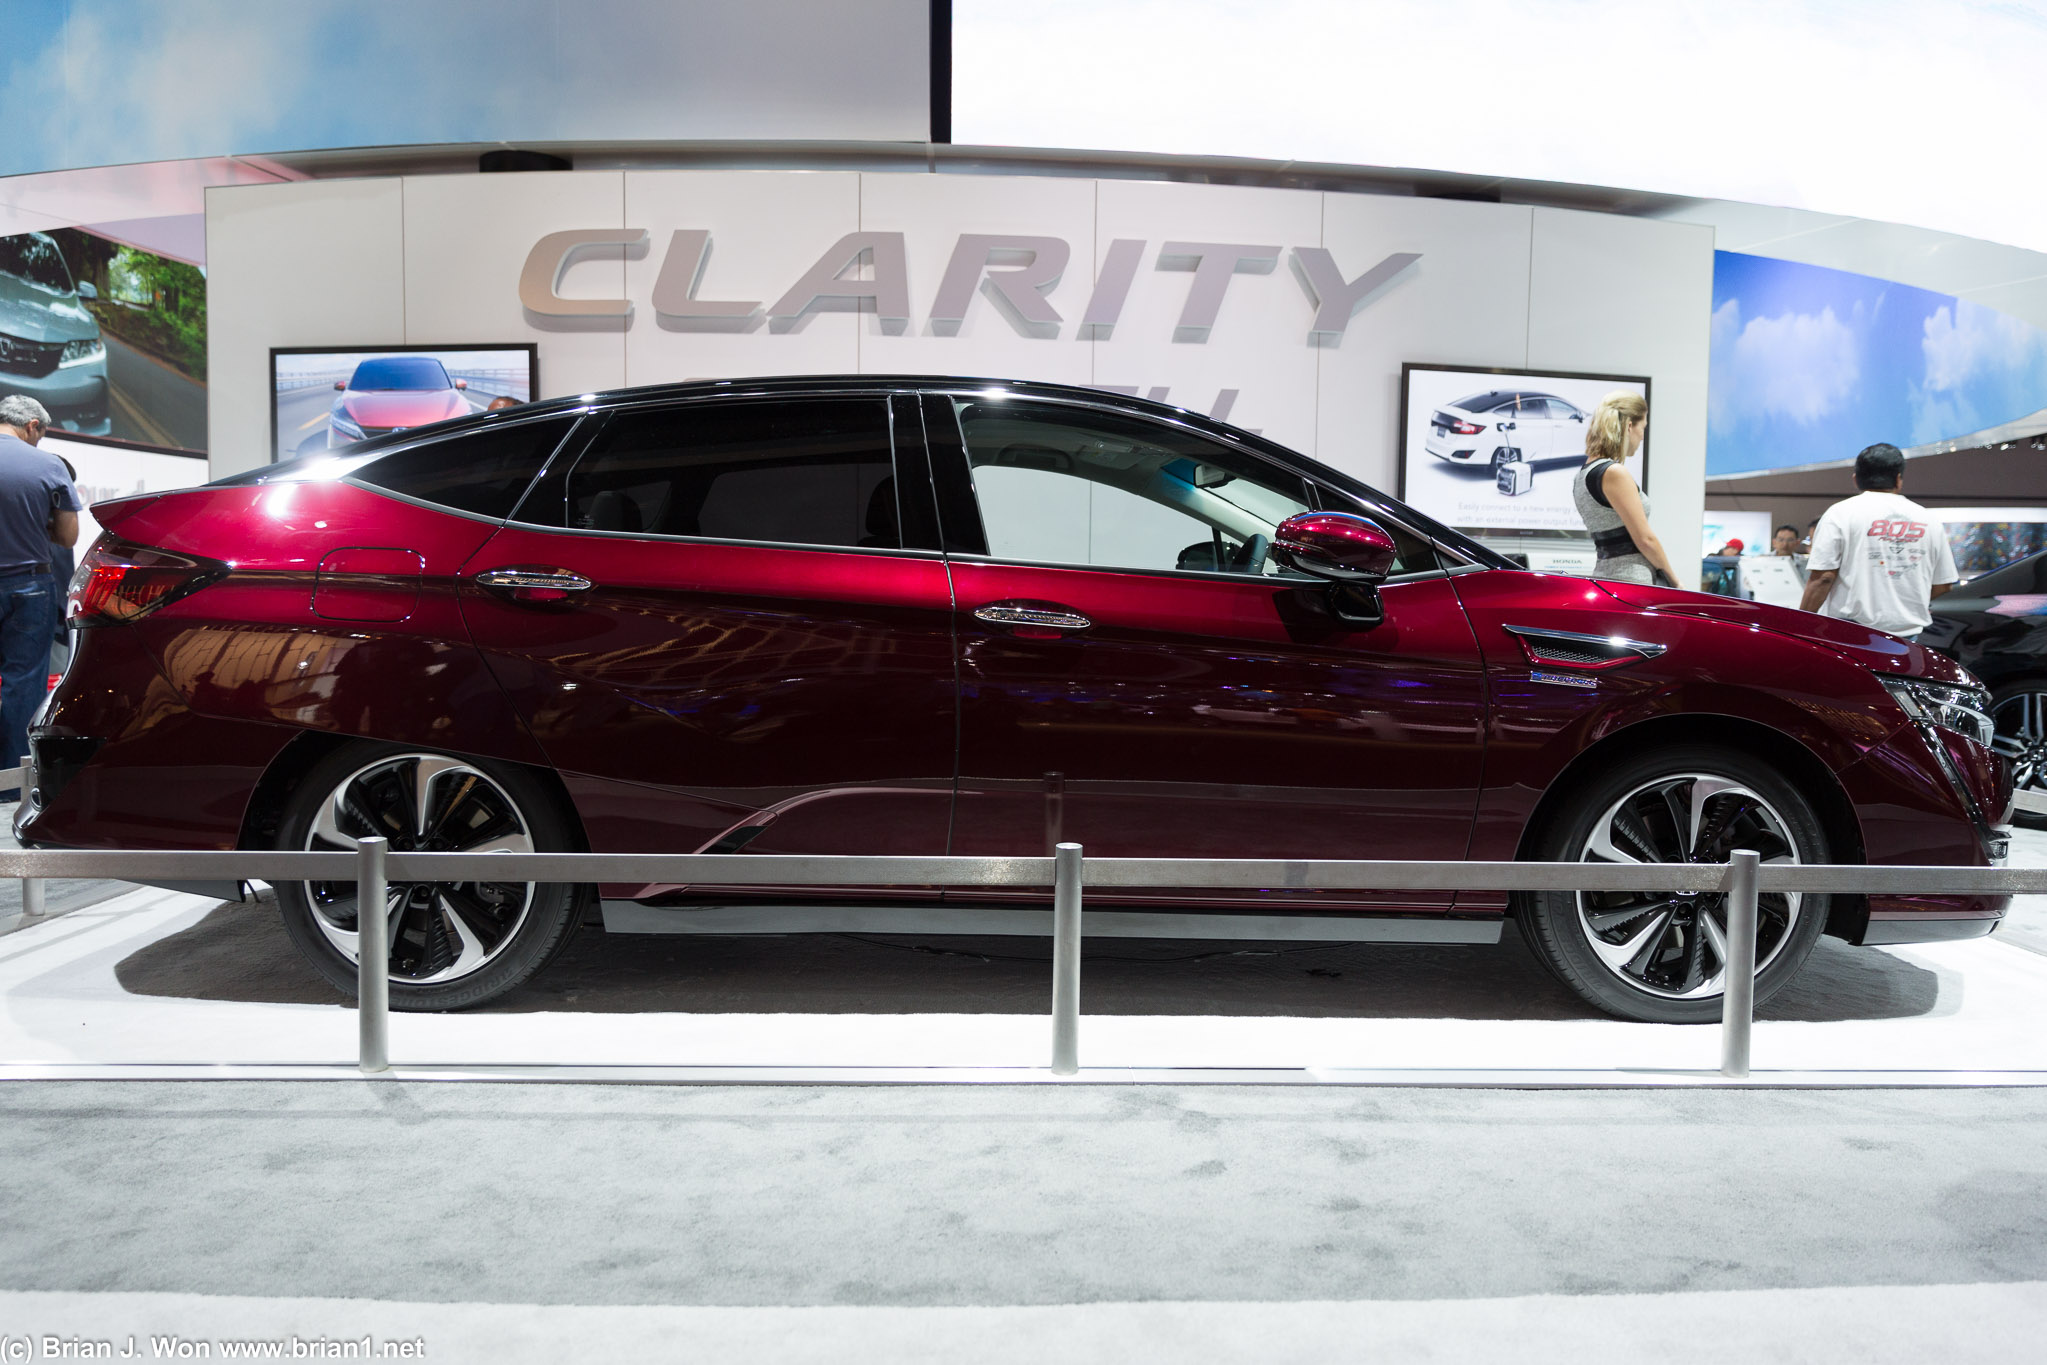 Honda Clarity. Fuel cell lives on.